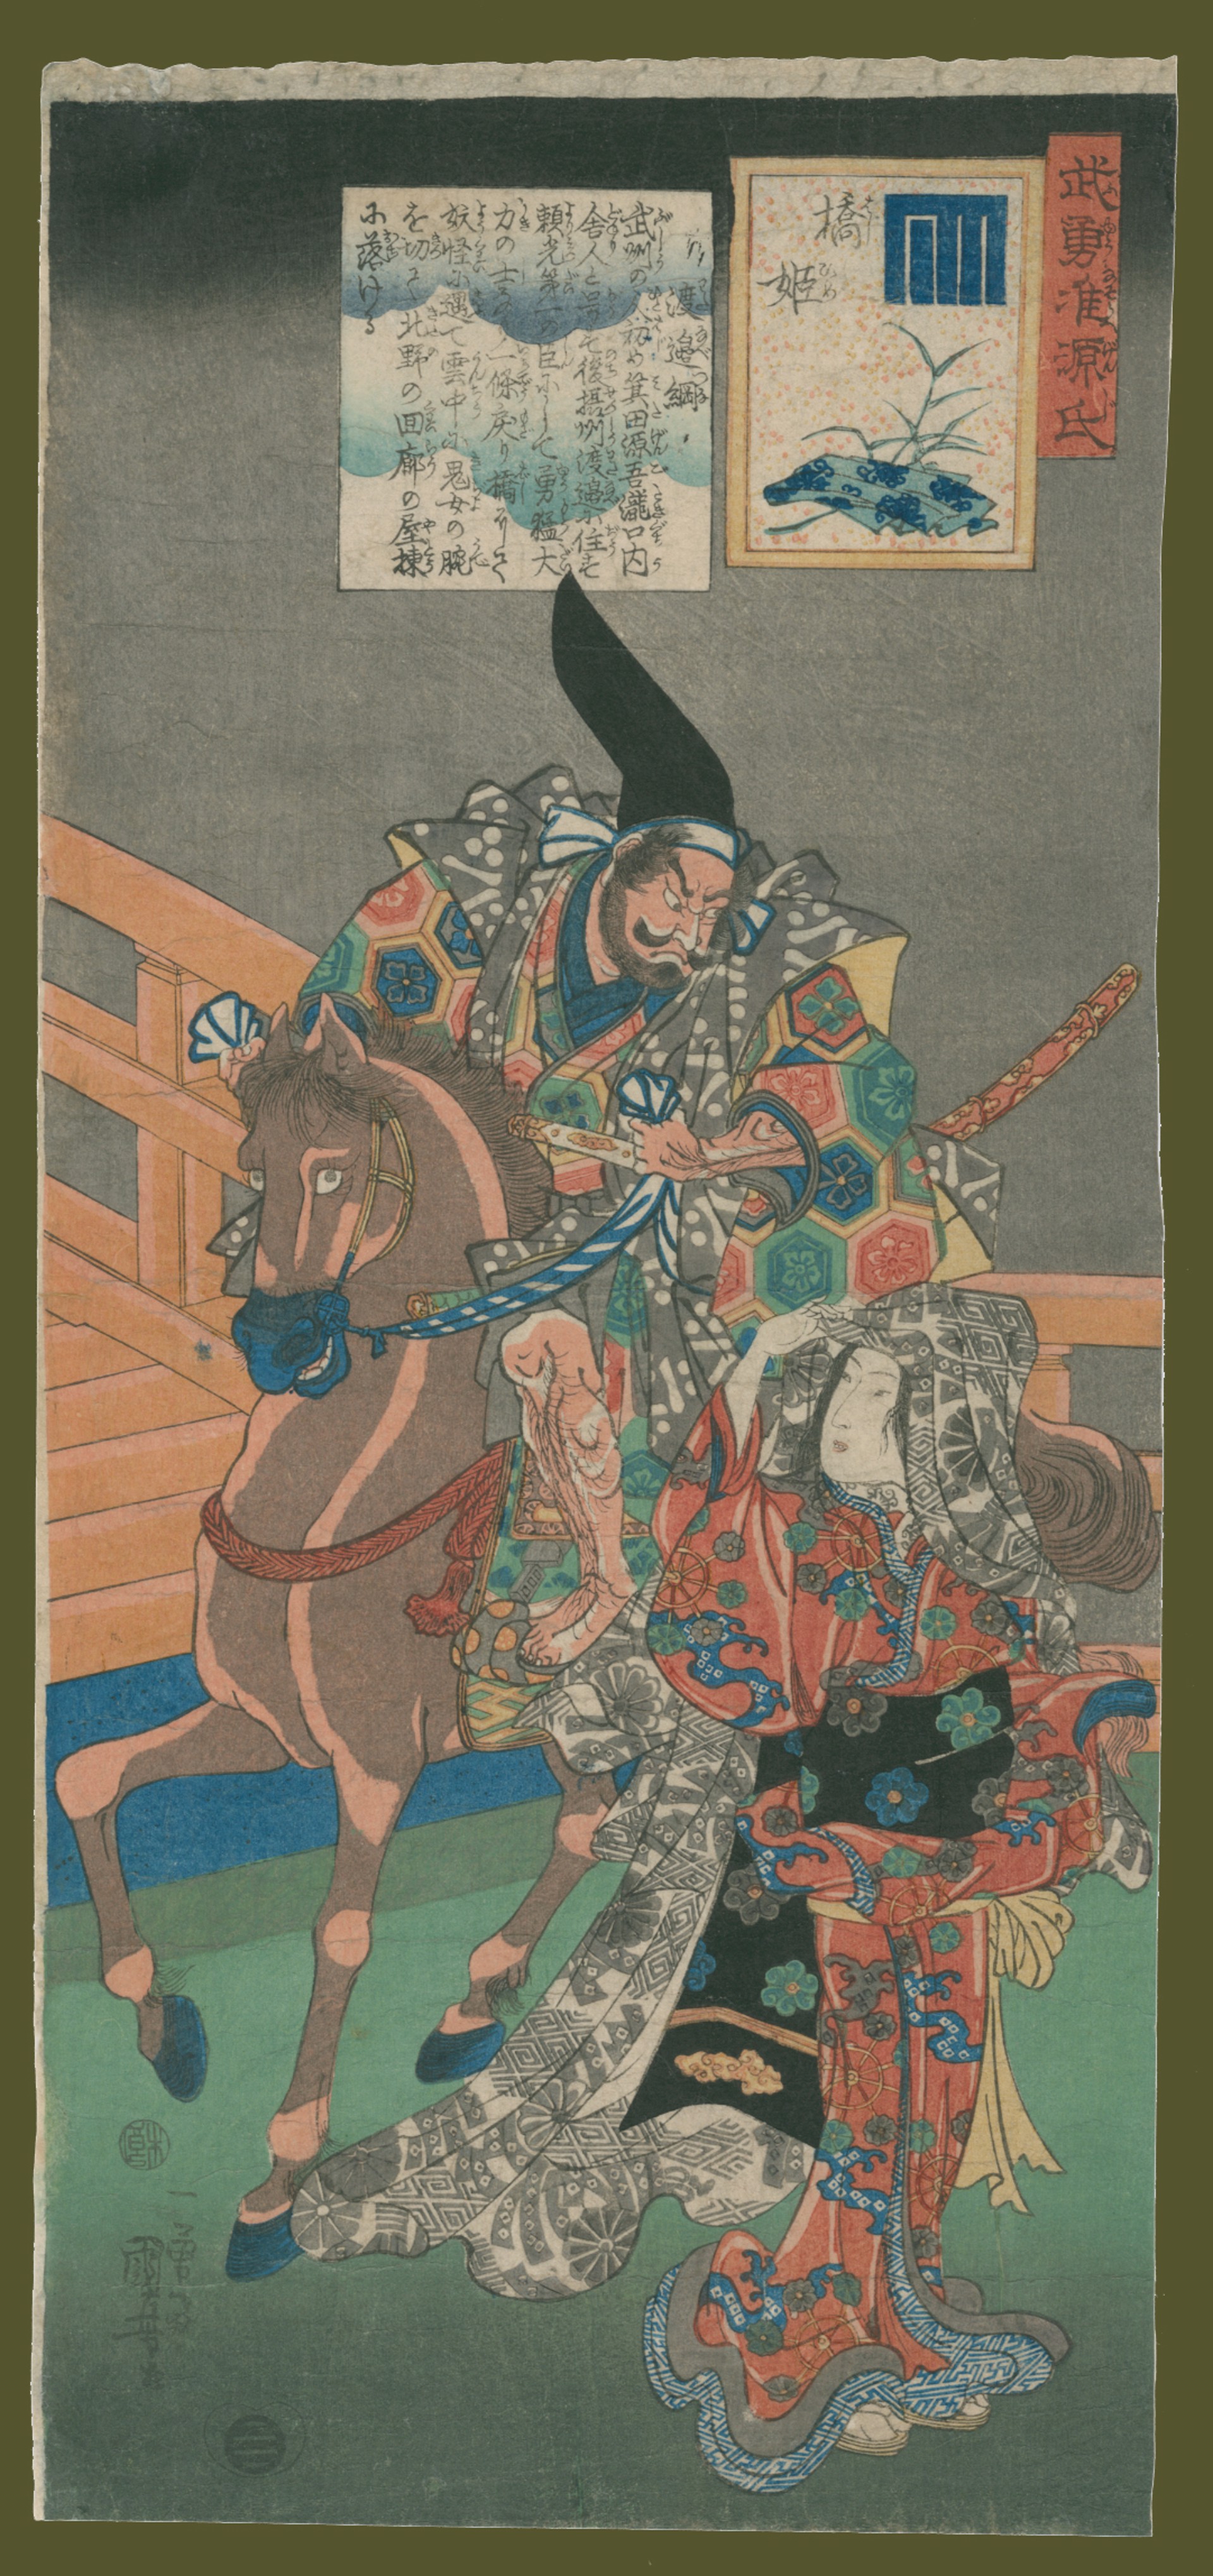 #45 Hashihime (Lady at the Bridge) Heroic Comparisons of the Chapters of Genji by Kuniyoshi